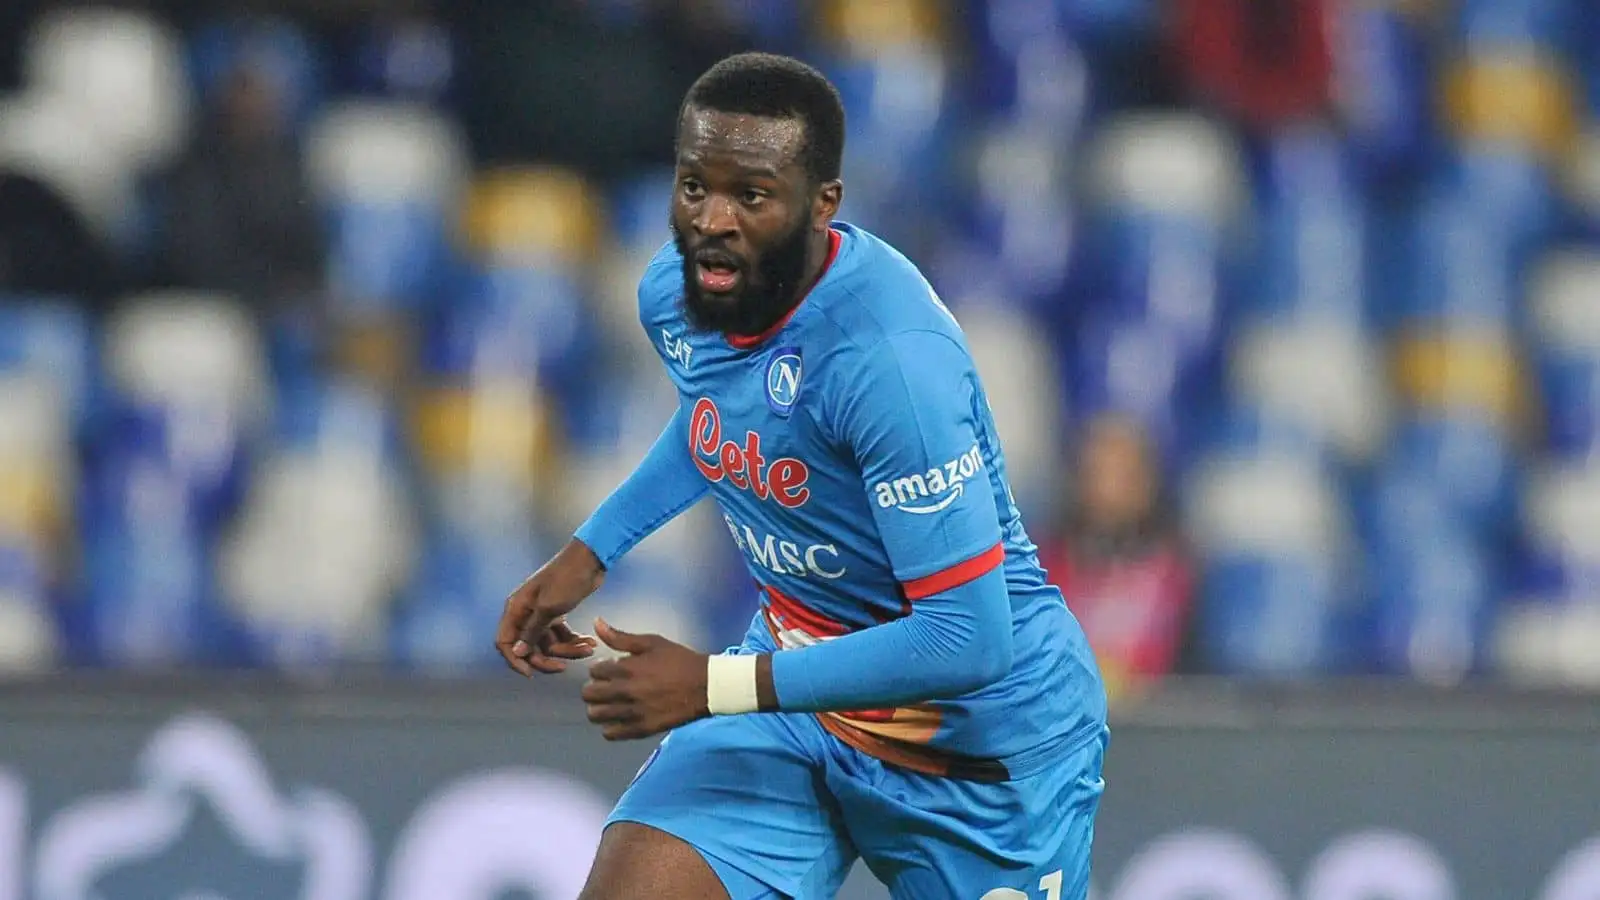 Tanguy Ndombele player of Napoli, during a friendly match that between Napoli vs Villareal final result, Napoli 0, Lille 4